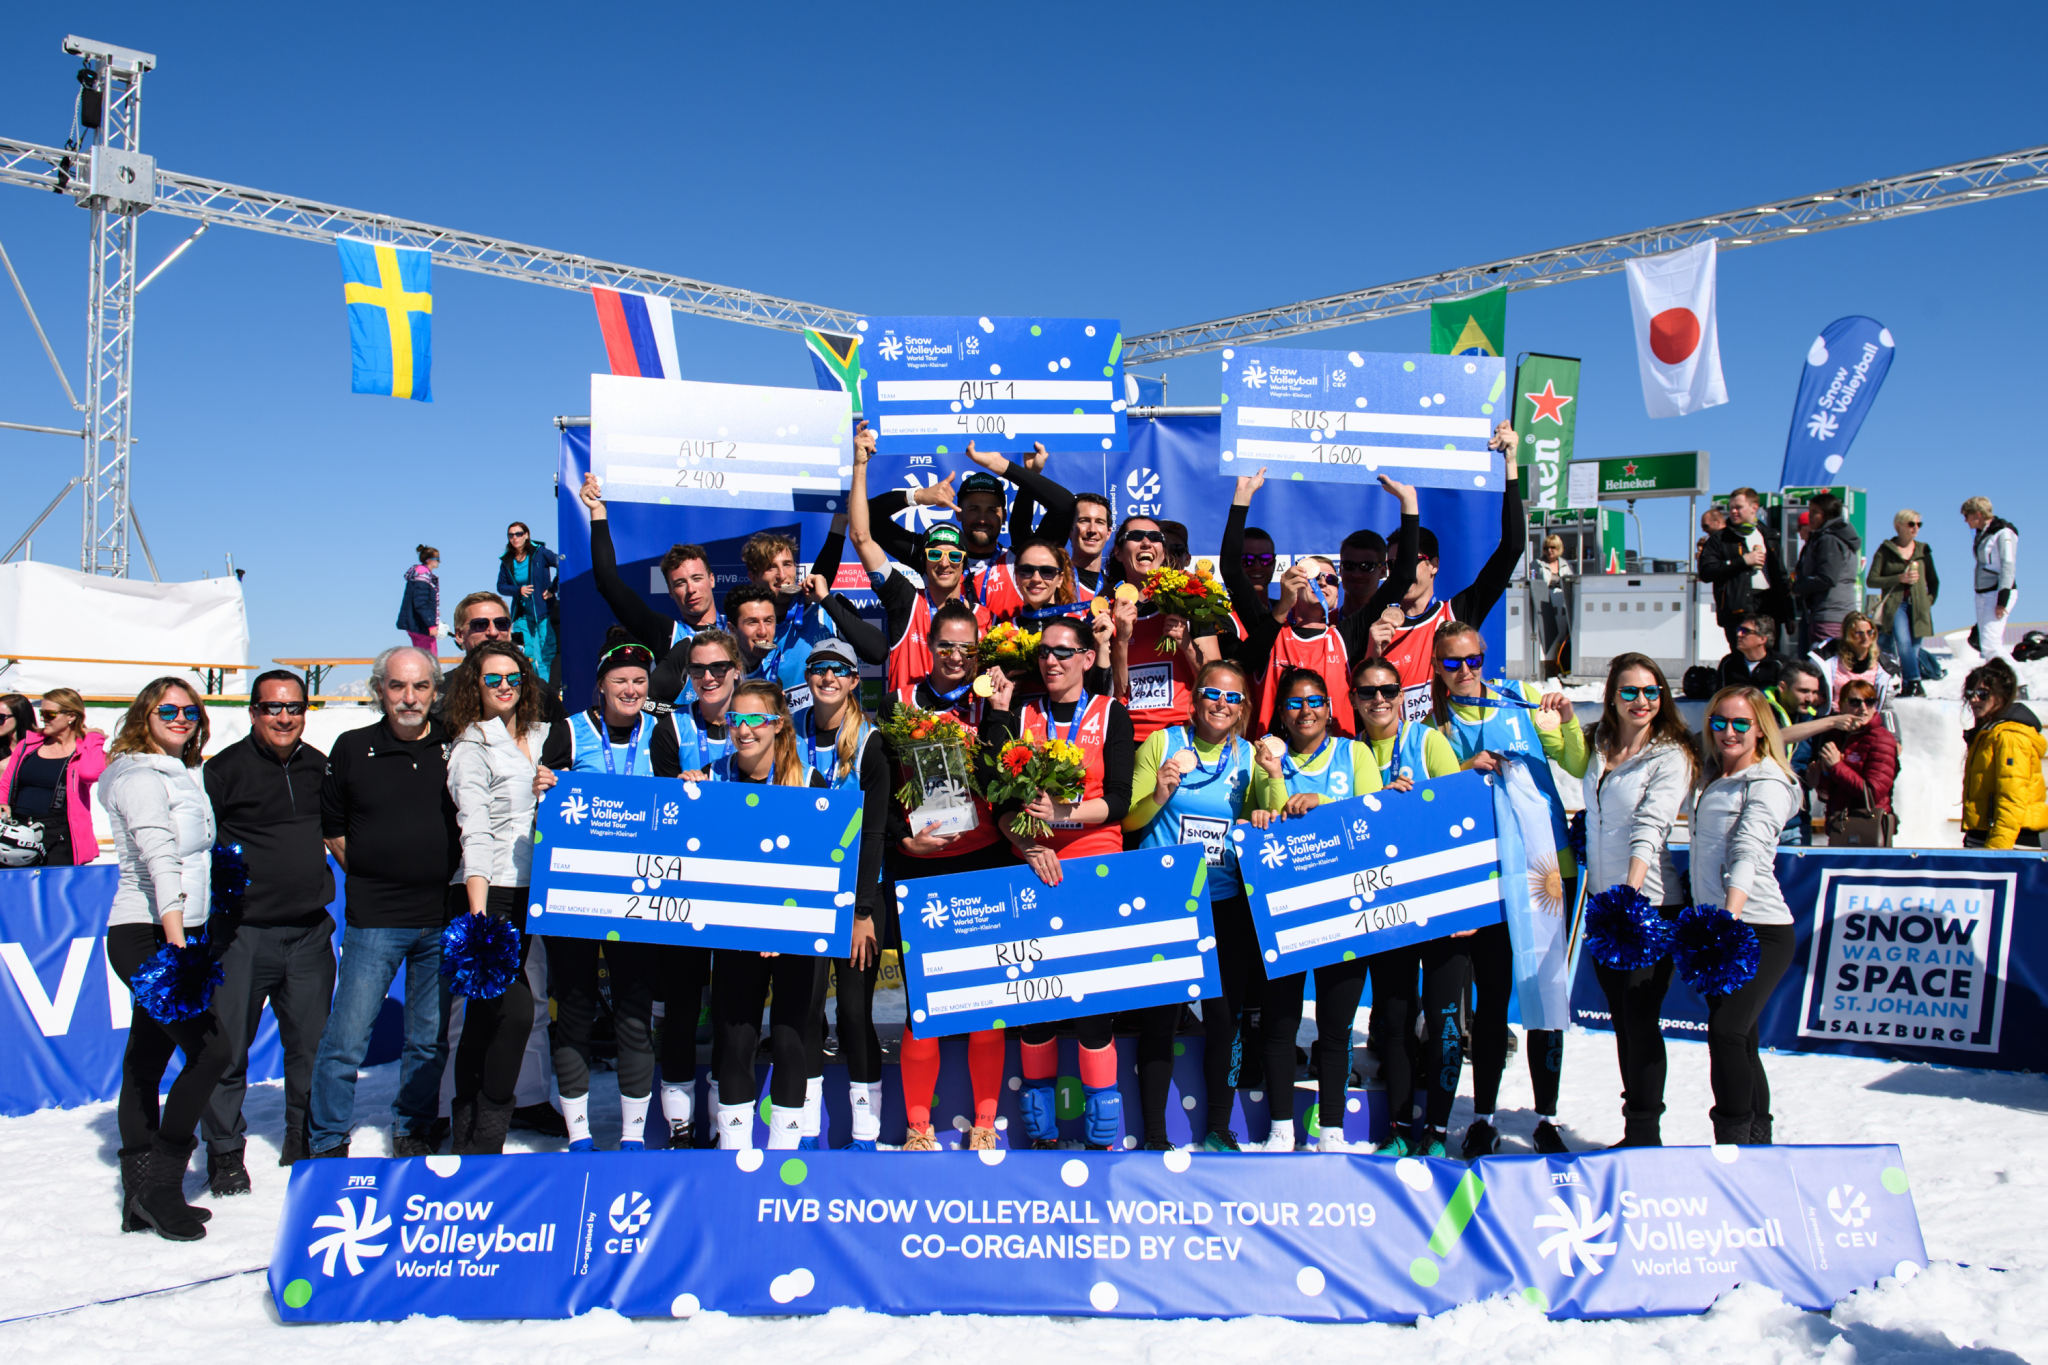 Kronplatz will host the second event of the FIVB Snow Volleyball World Tour season ©FIVB